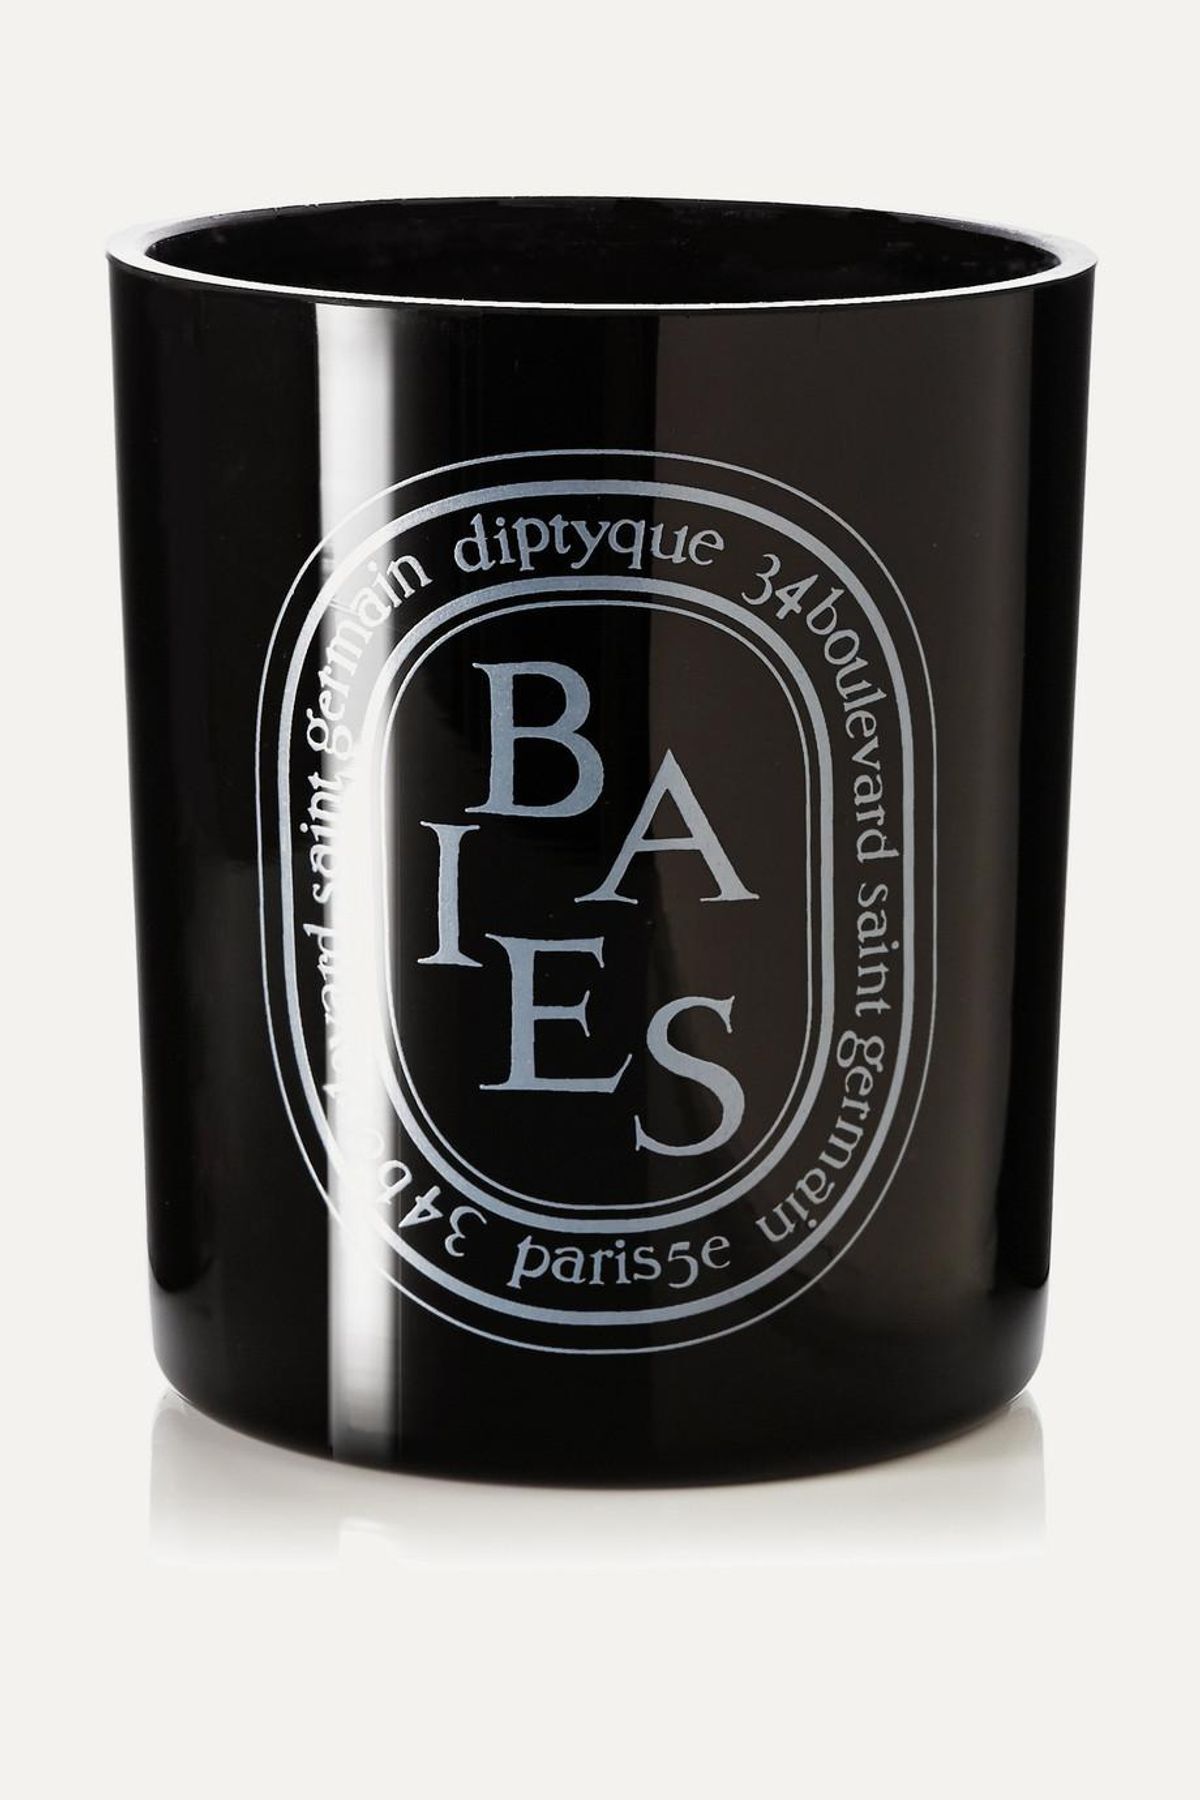 diptyque black baies scented candle